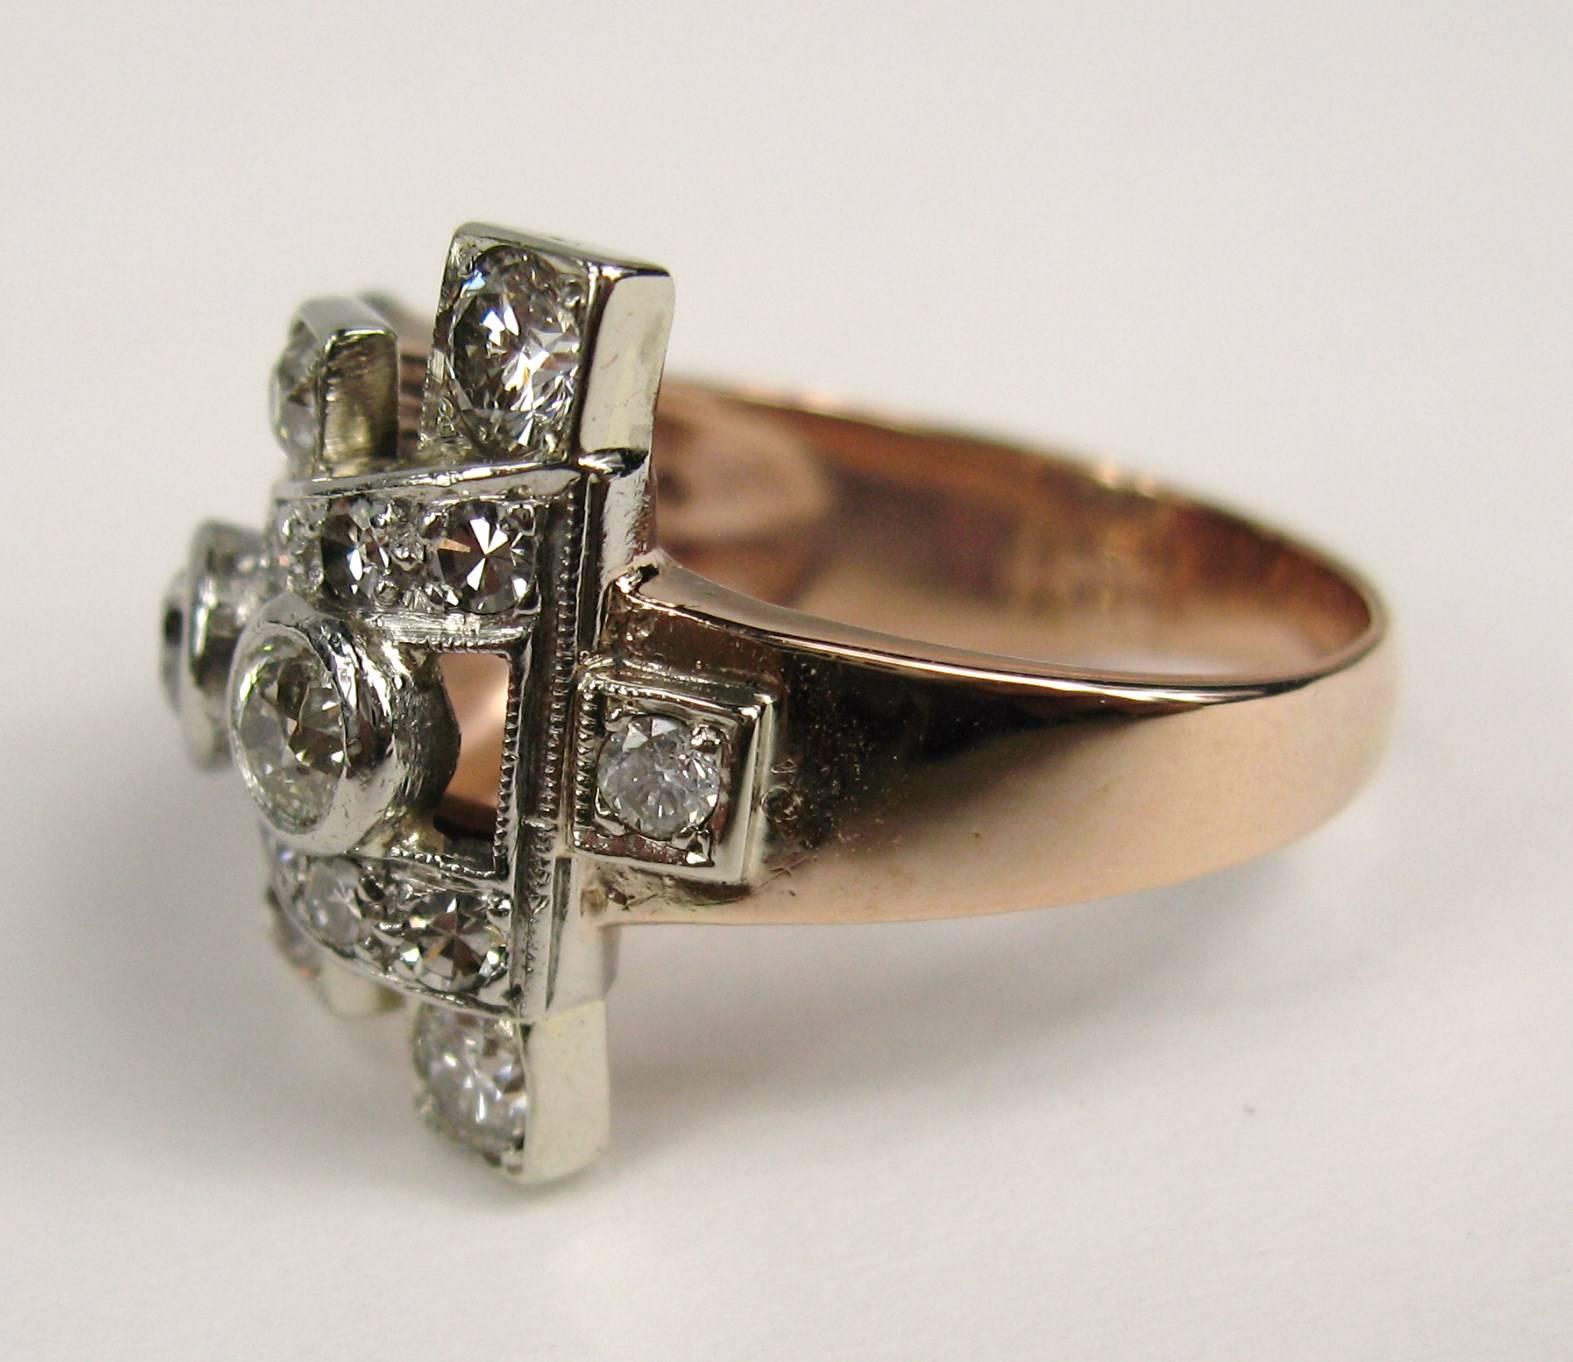 Stunning 1940s Ring. 15 diamonds total 1.5 carts, as well as 10 prong set graduated in size rubies. 13 prong set diamonds as well. Ring is a size 7 but can be sized up or down by us or your jeweler. This is a stunning example of 1940s jewelry.